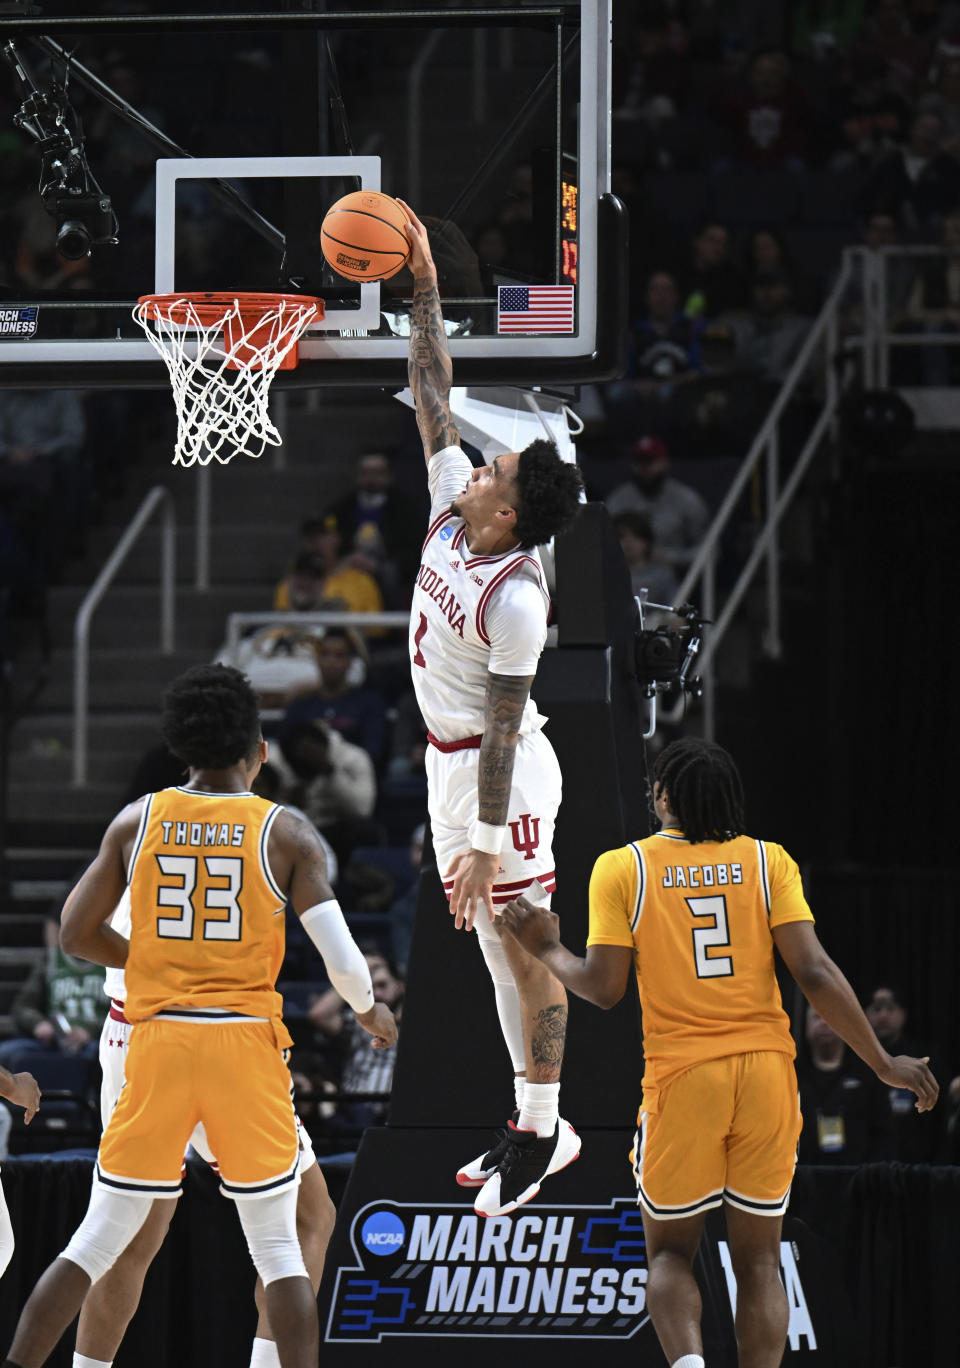 Indiana guard Jalen Hood-Schifino scores against Kent State forward Miryne Thomas (33) and guard Malique Jacobs (2) during the first half of a first-round college basketball game in the NCAA Tournament Friday, March 17, 2023, in Albany, N.Y. (AP Photo/Hans Pennink)